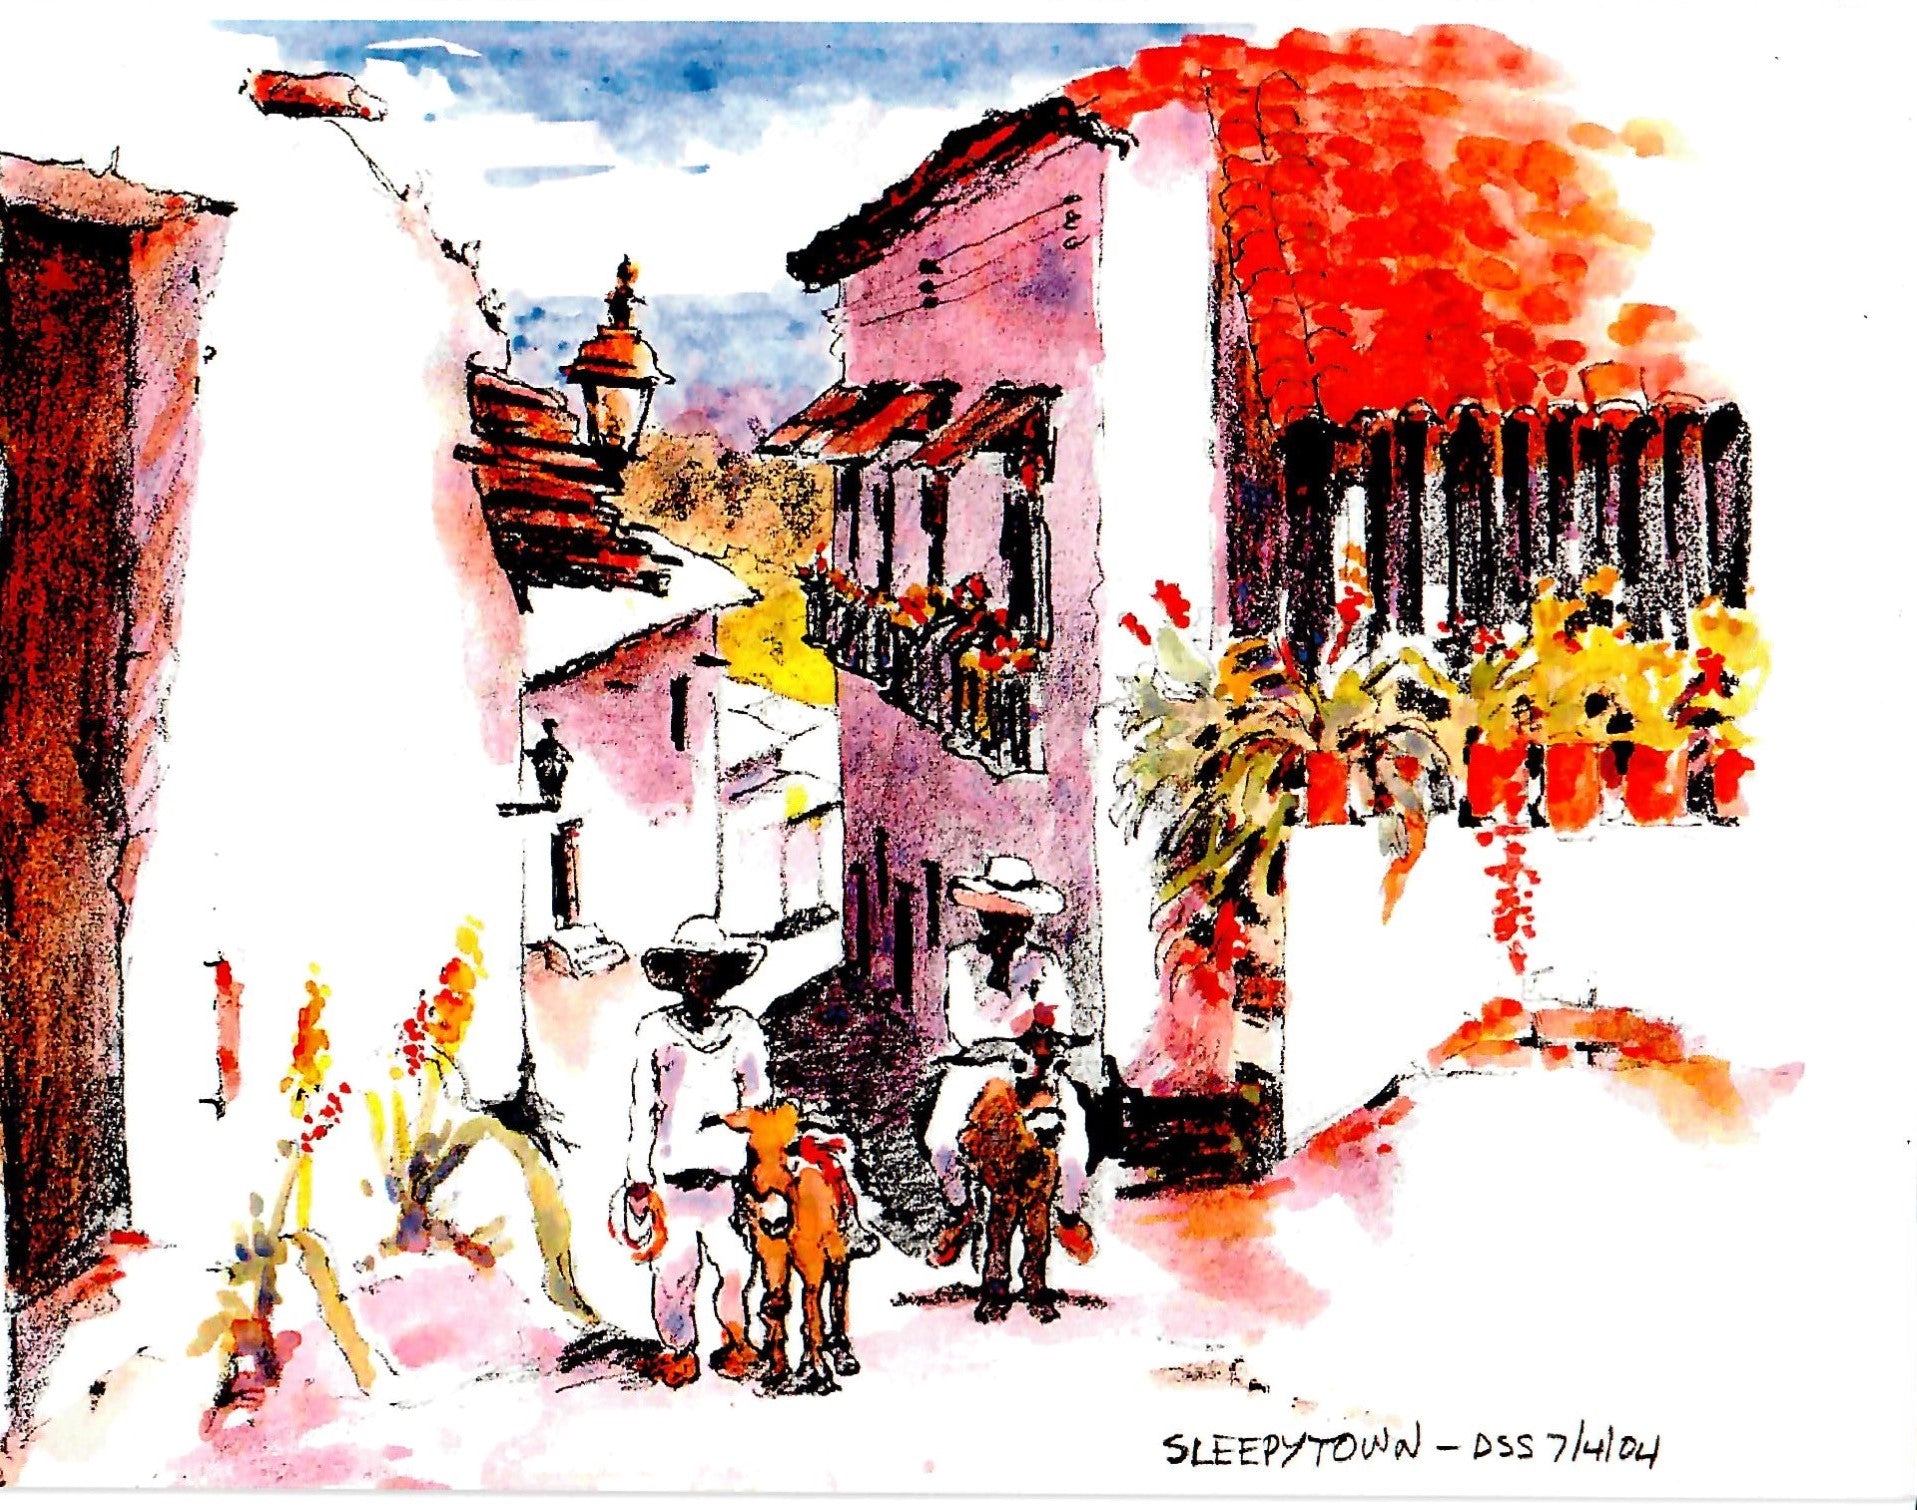 Two workers taking their donkeys down the street of a small sleepy Mexican town in the mountains.  Watercolor and ink.